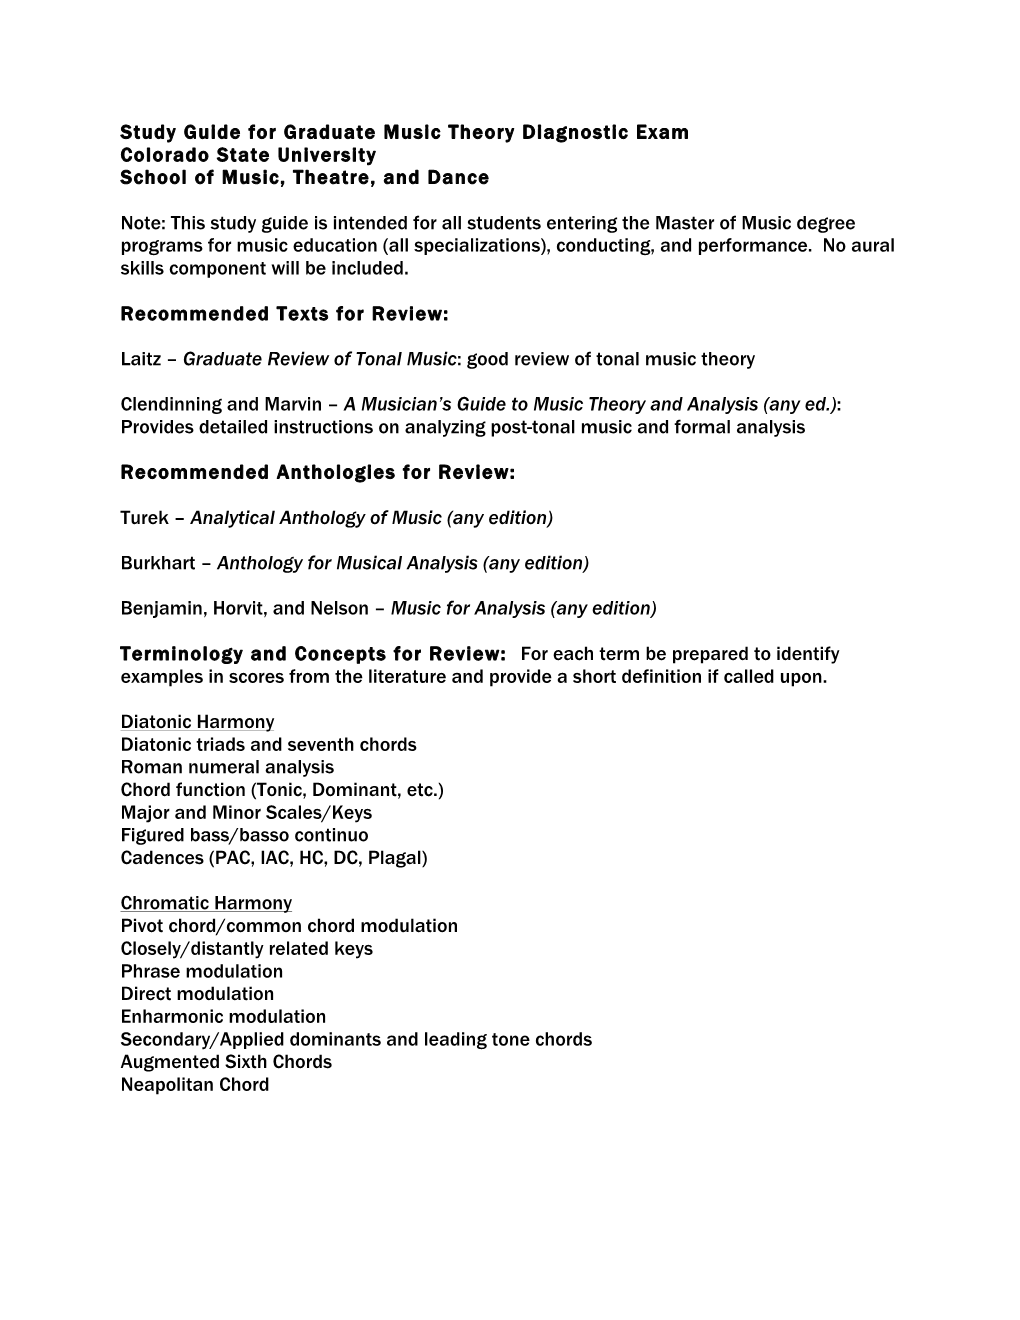 Study Guide for Graduate Music Theory Diagnostic Exam Colorado State University School of Music, Theatre, and Dance